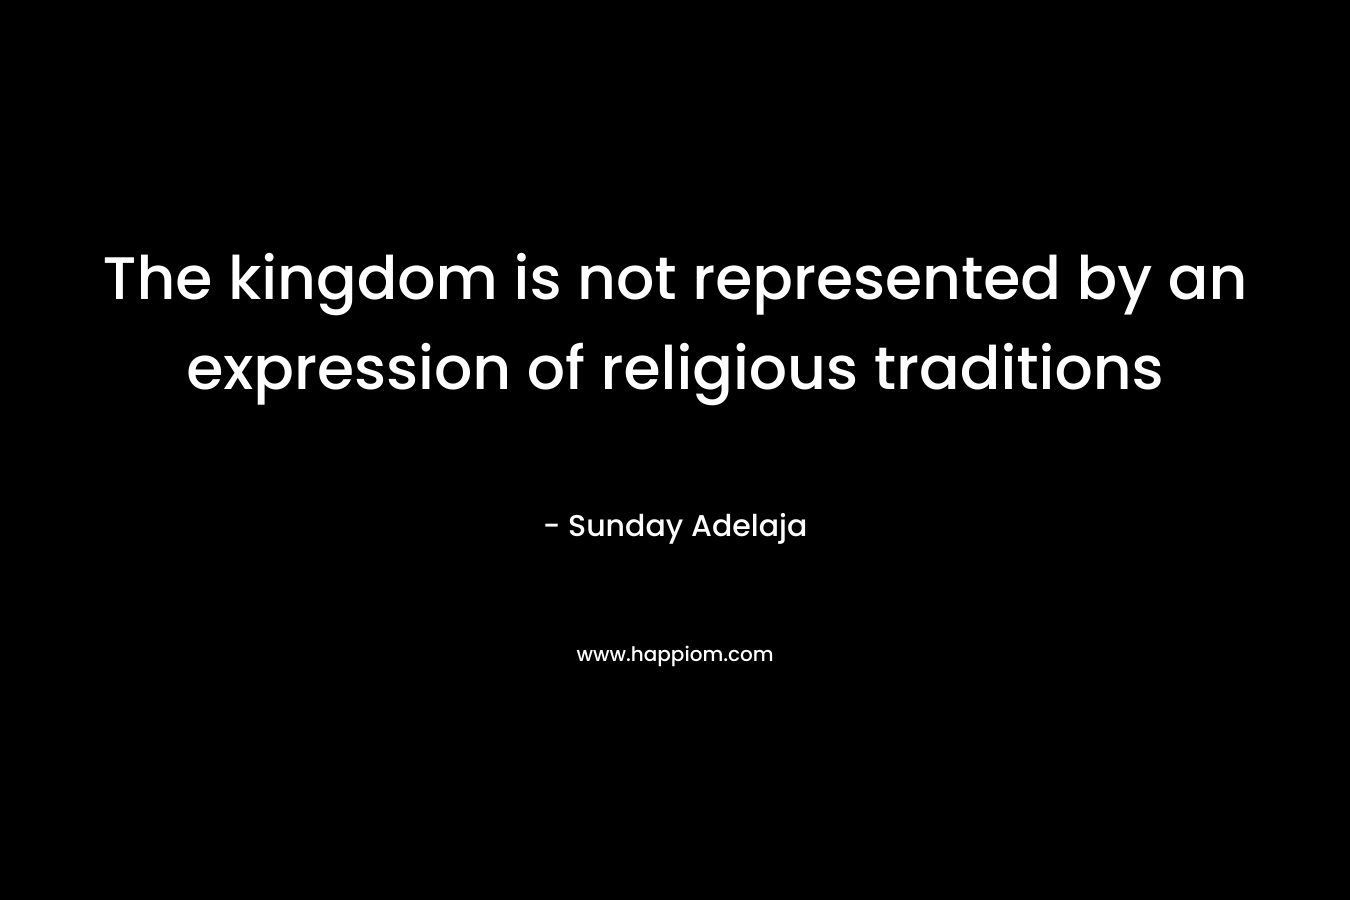 The kingdom is not represented by an expression of religious traditions